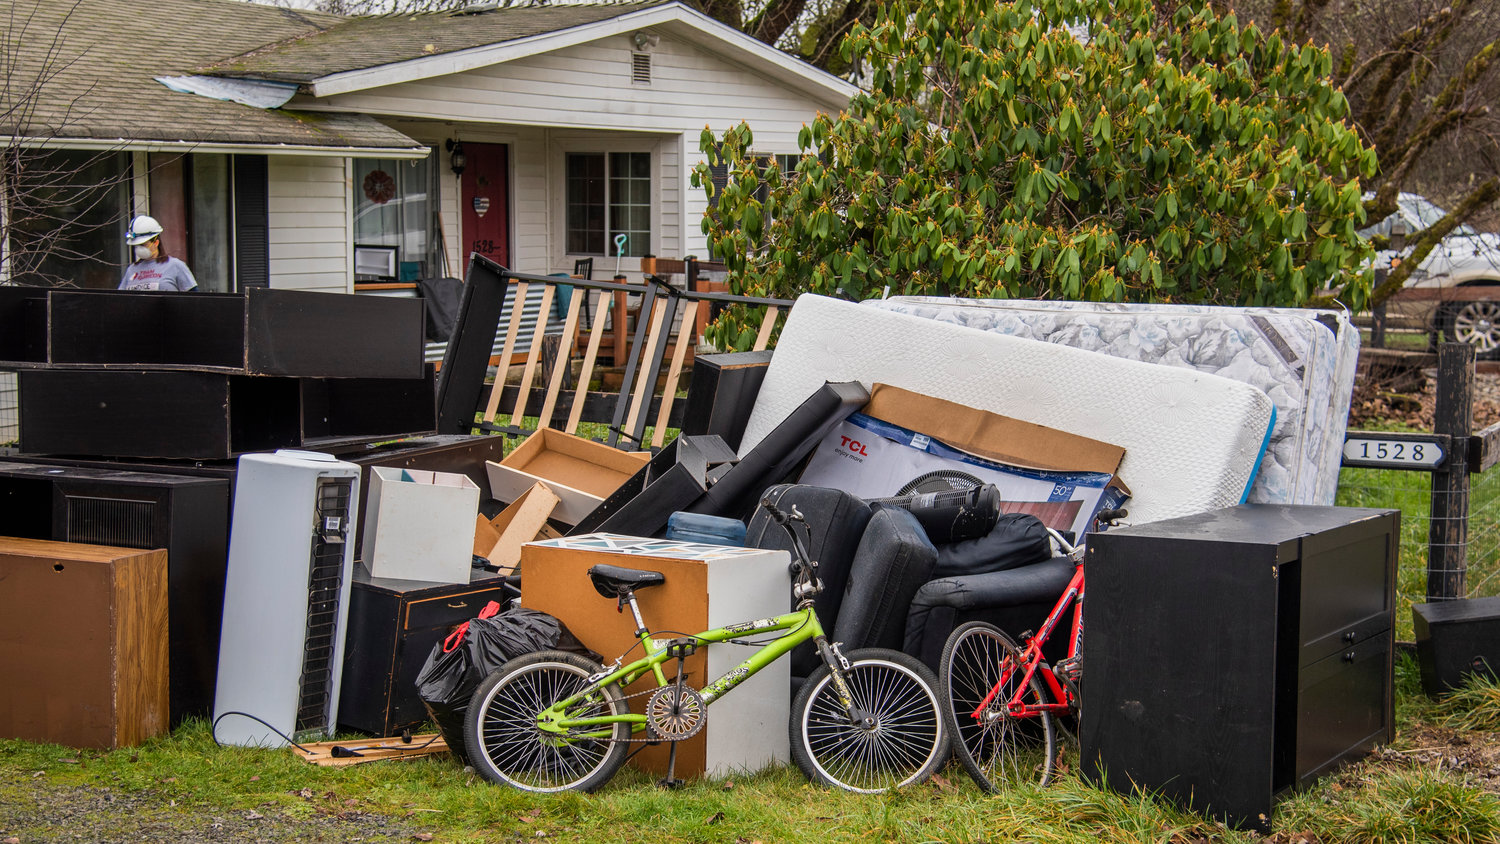 Personal items and furniture damaged in the flood sit outside the Pardue home along Ceres Hill Road in Centralia on Sunday.